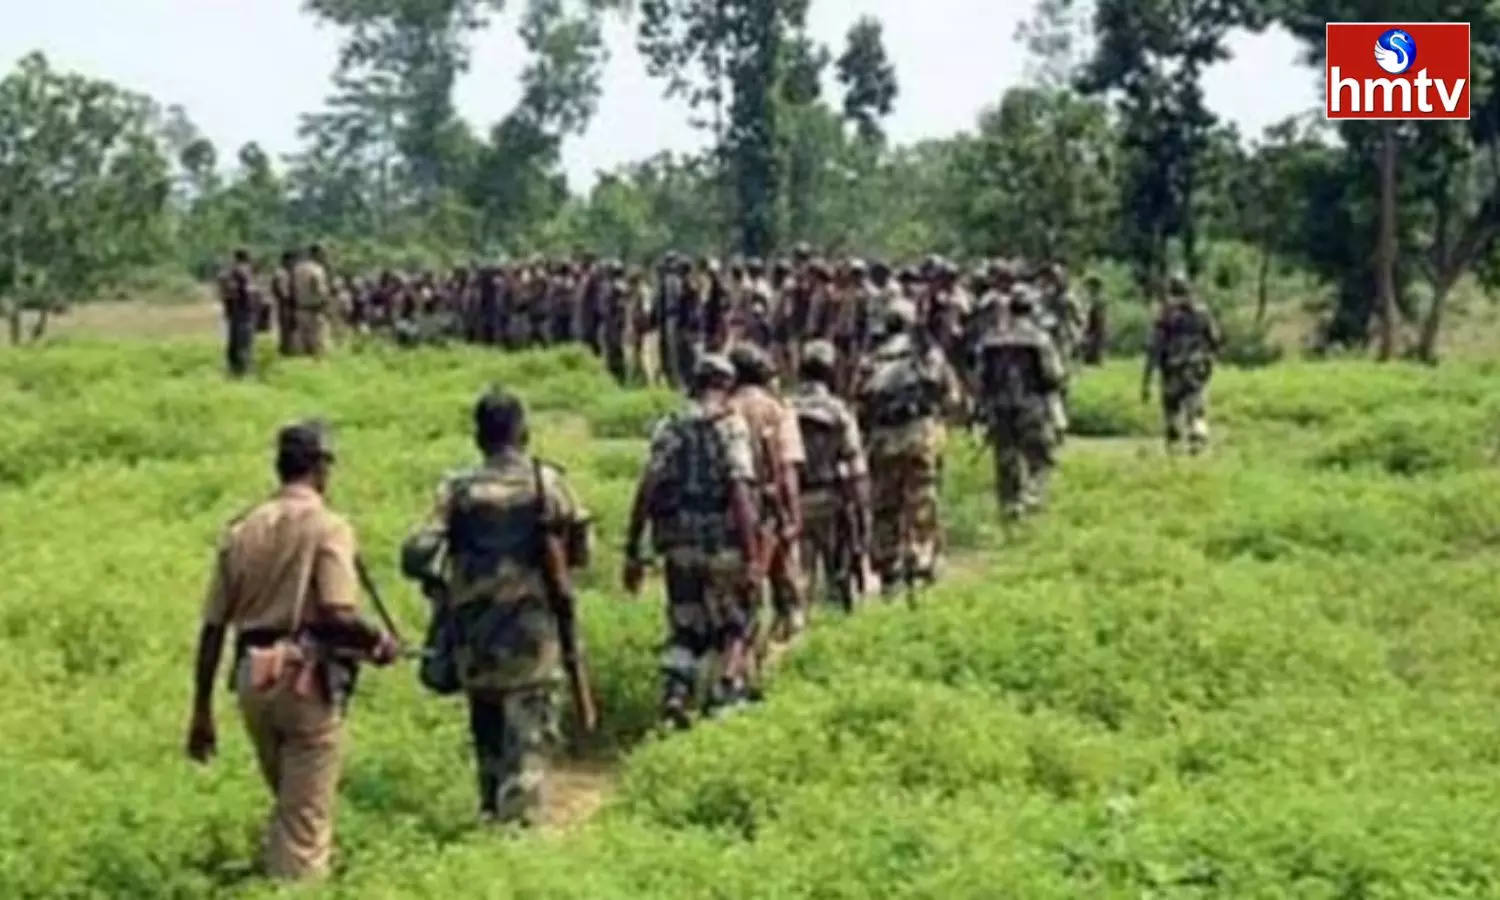 Search operation for Naxalites in Narayanpur district of Chhattisgarh